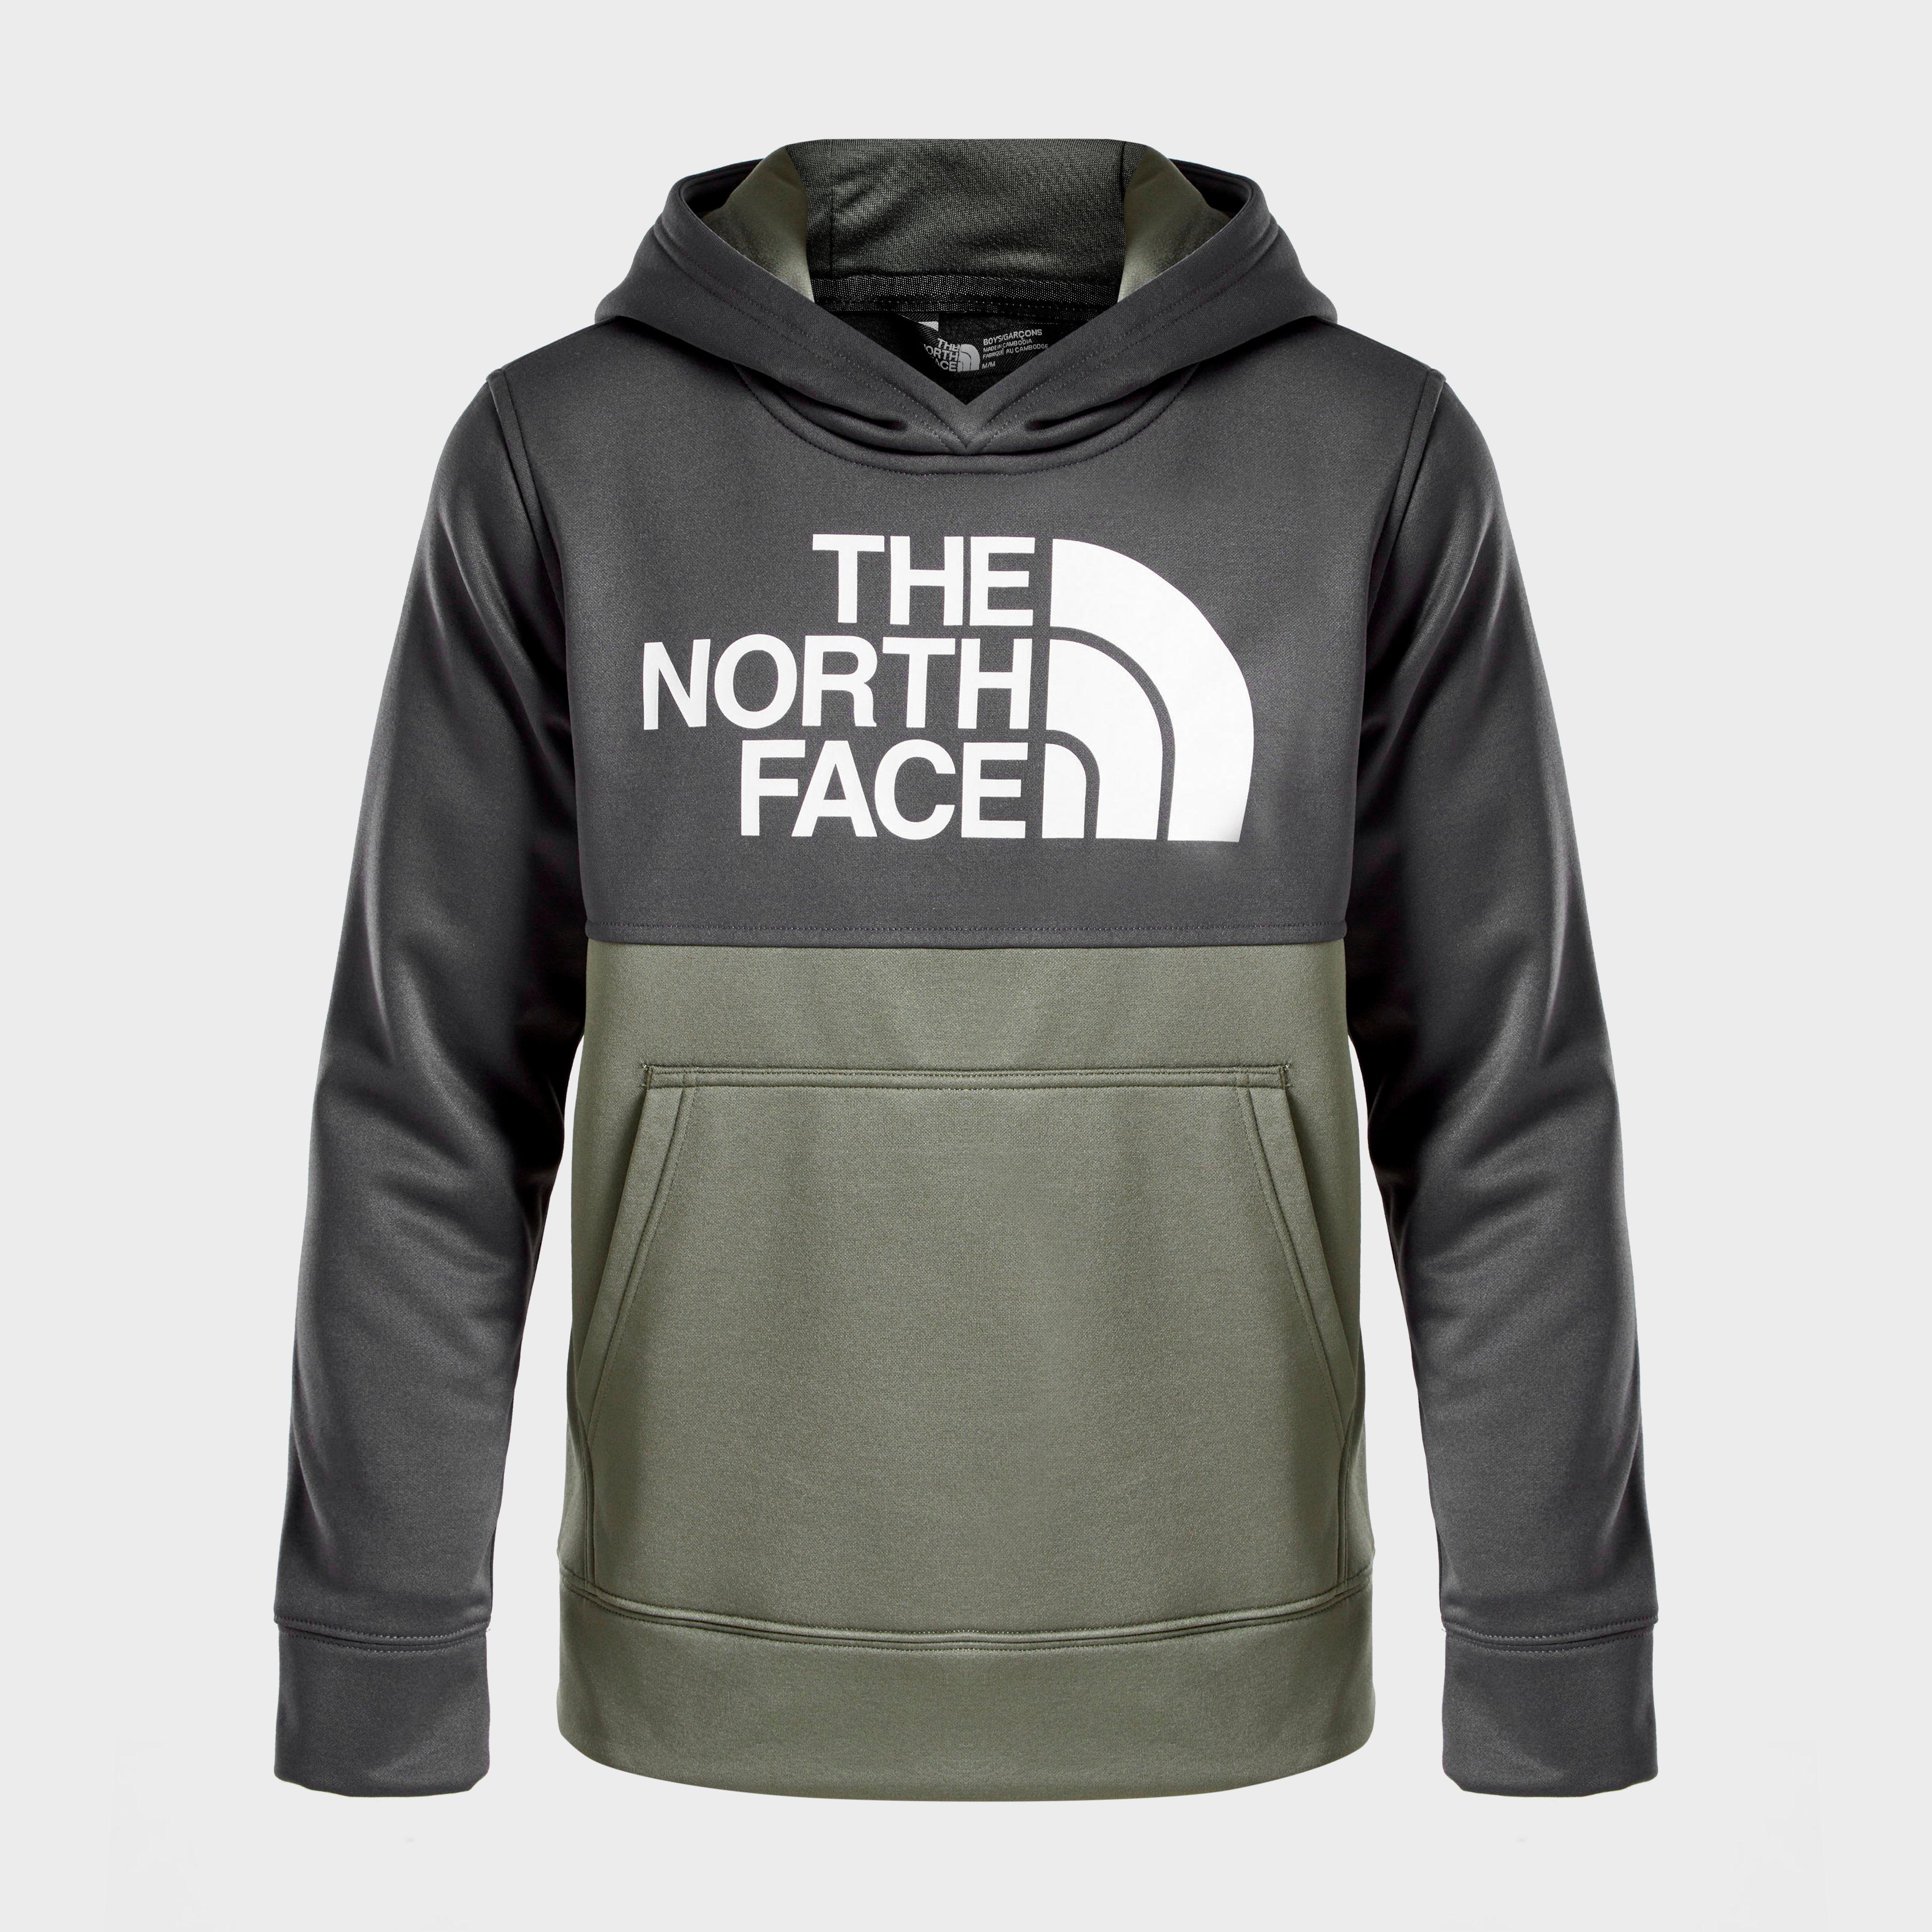 the north face kids clothing